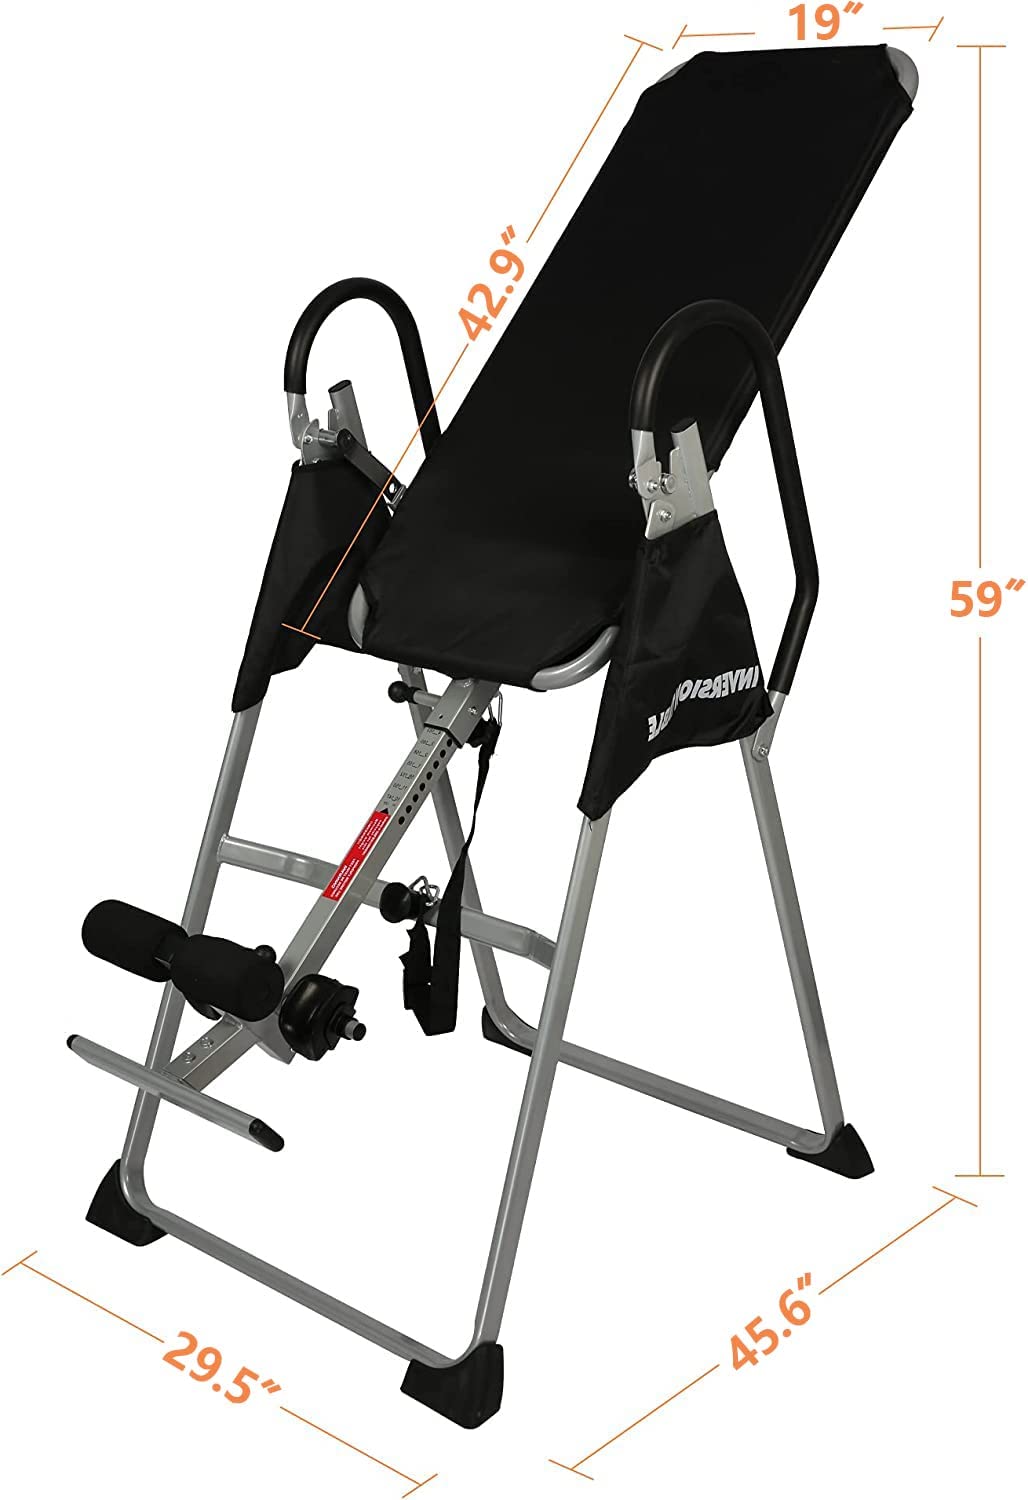 (Out of Stock) Inversion Bed, Adjustable Inversion Table, Foldable Inversion Stretcher, Inversion Stand